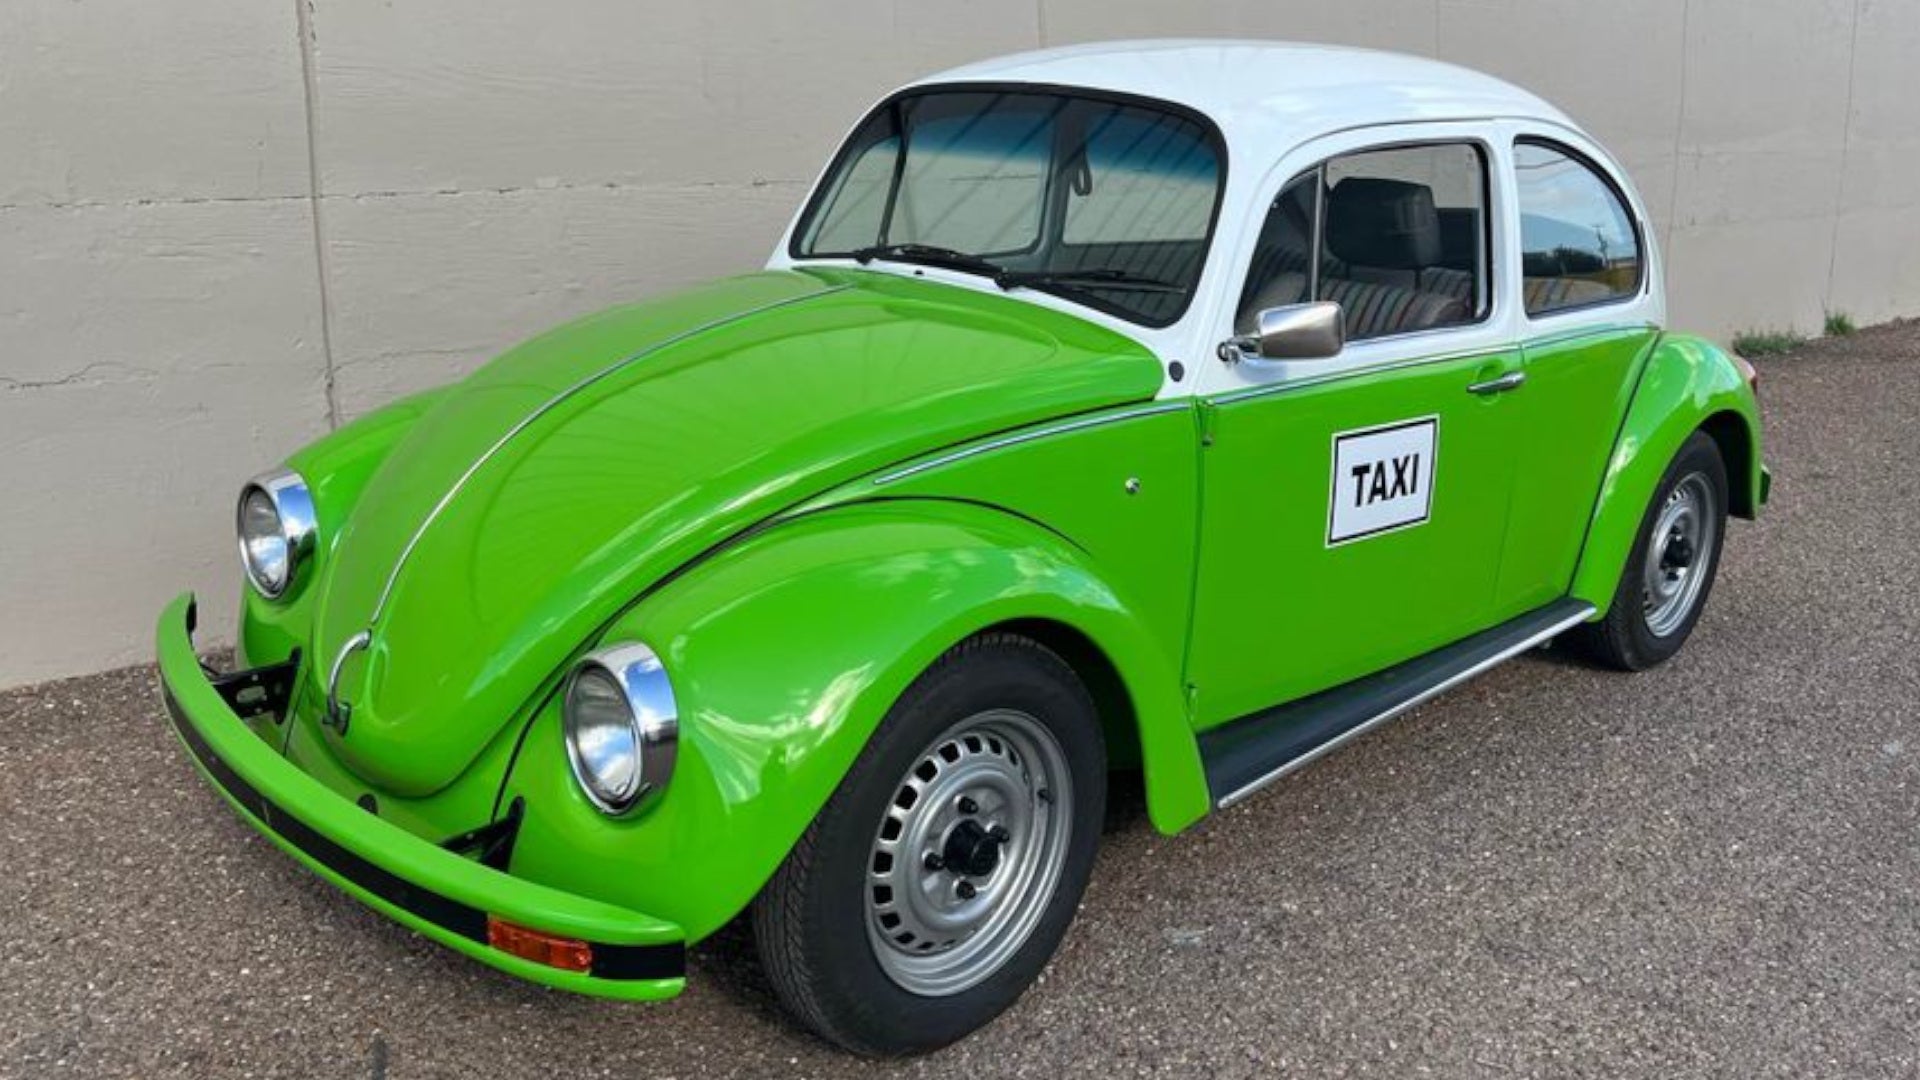 Buy This Authentic VW Beetle Mexico City Taxi for $12,500